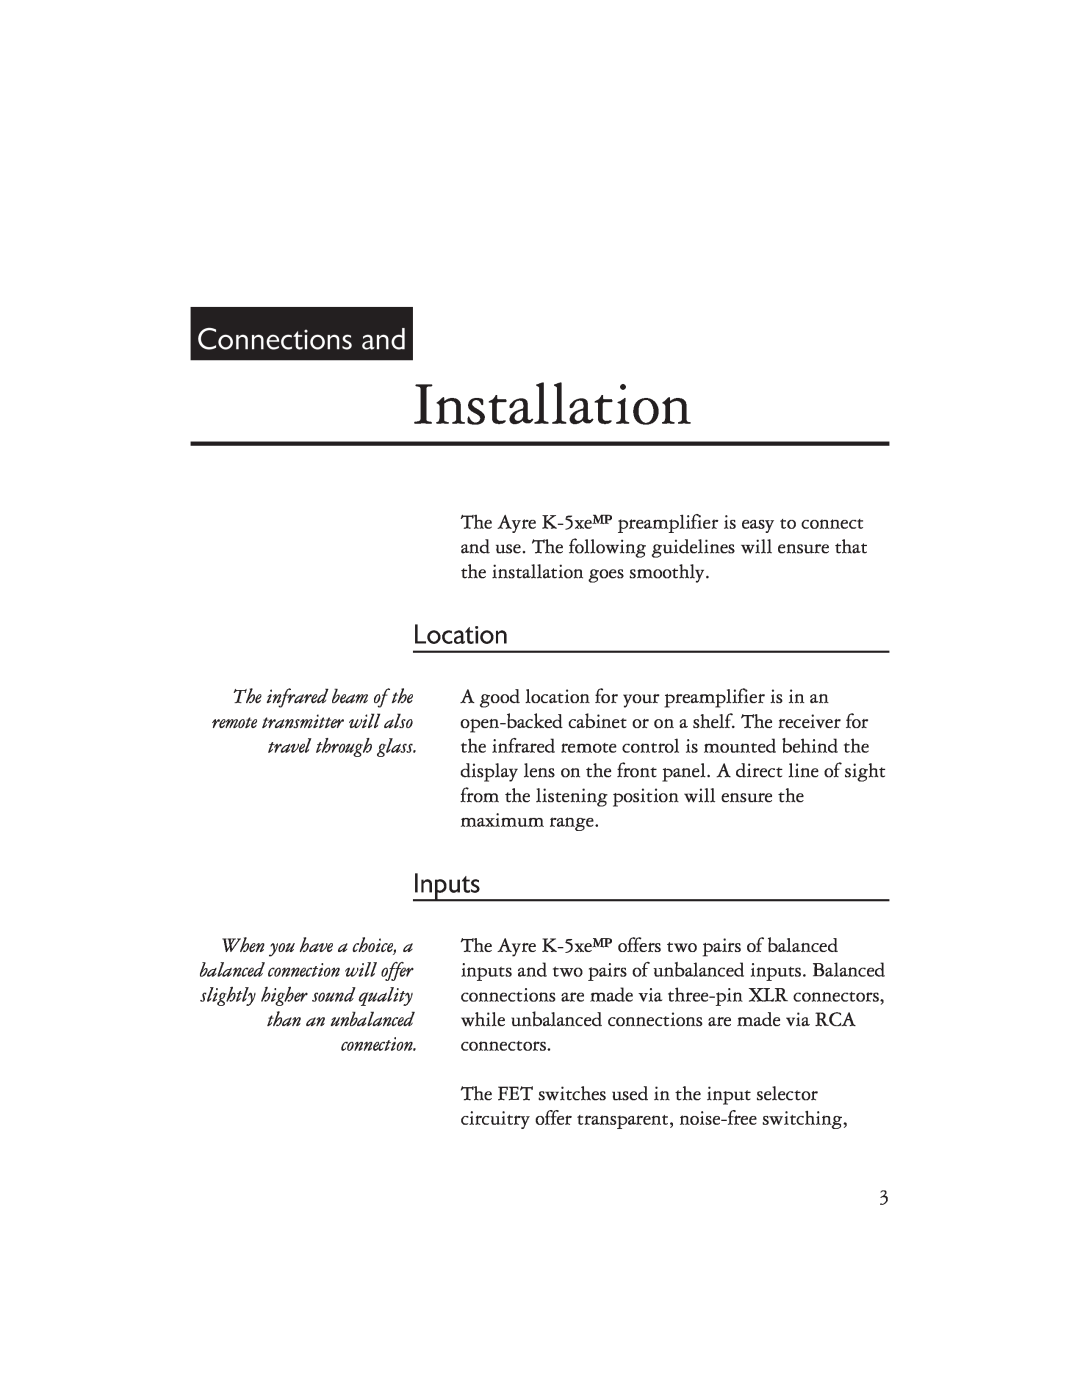 Ayre Acoustics K-5XEMP owner manual Installation, Connections and, Location, Inputs, connection. connectors 